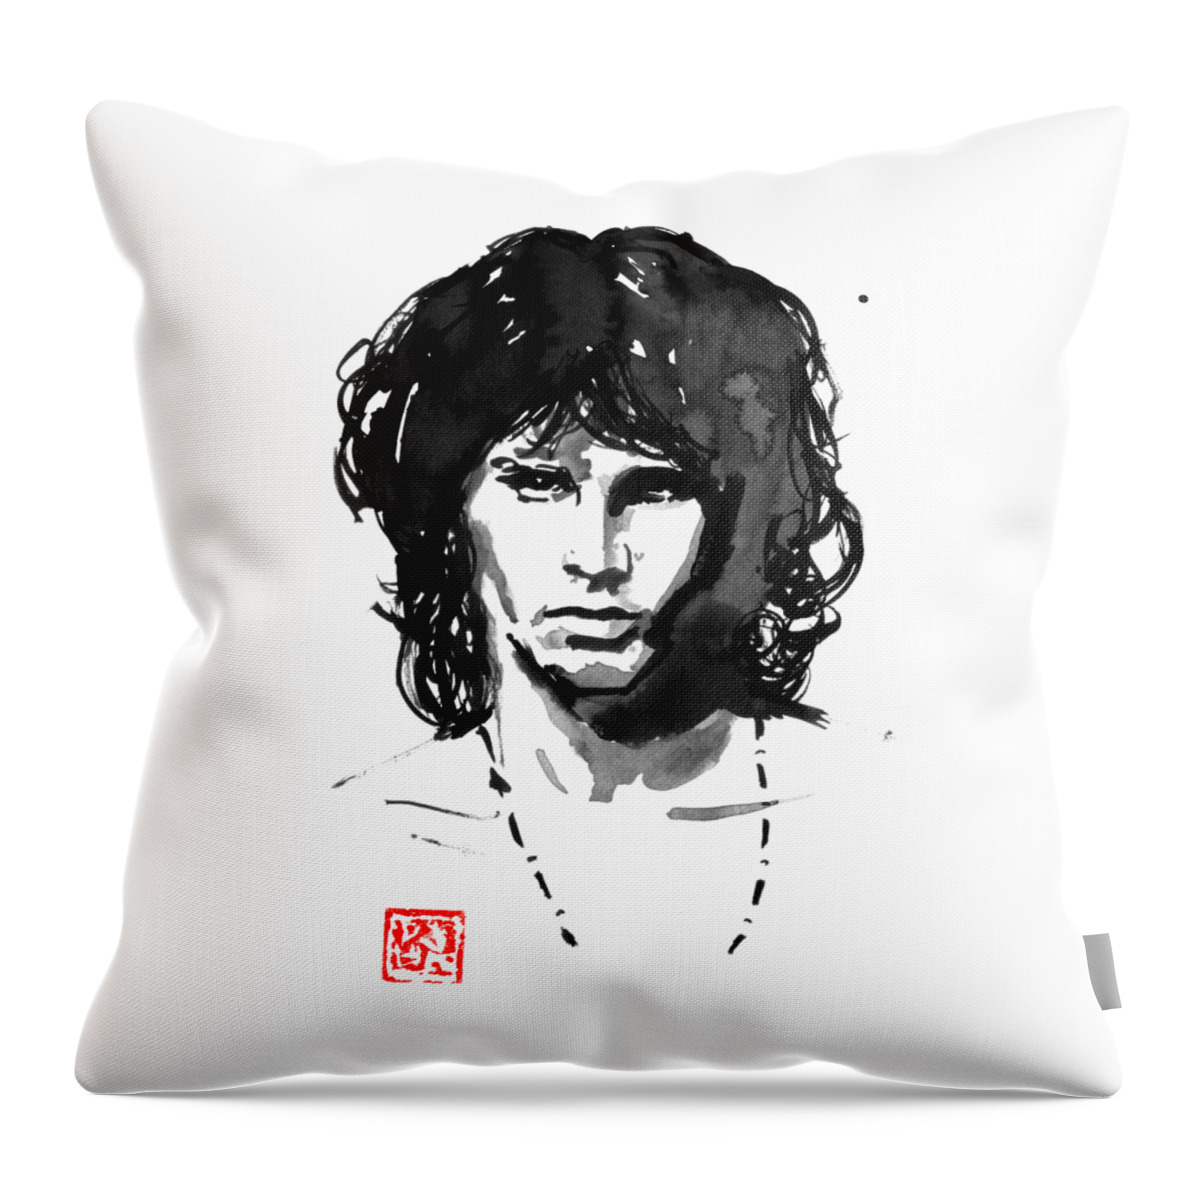 Jim Throw Pillow featuring the drawing Jim Morrison by Pechane Sumie